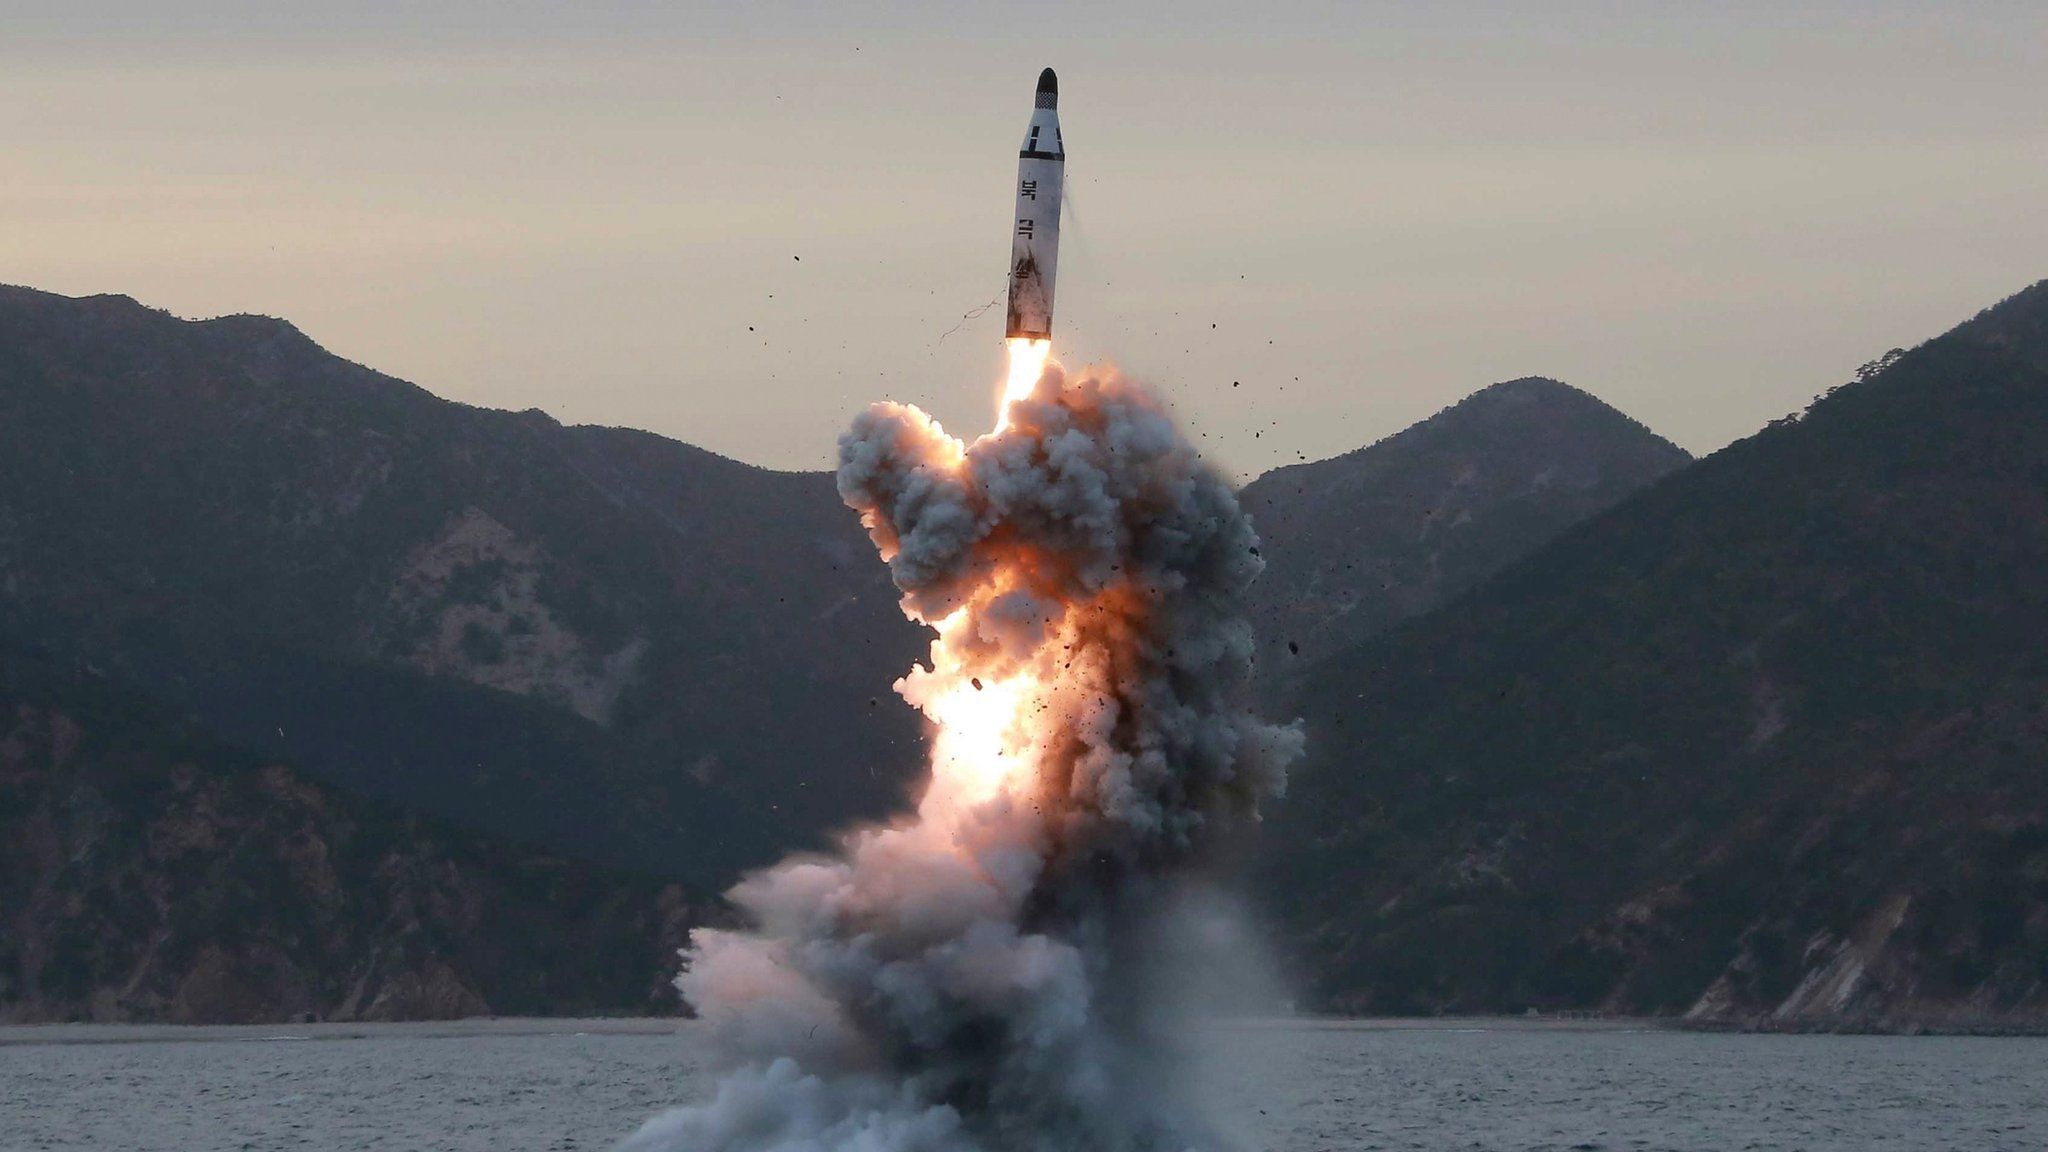 An undated file photo released by the North Korean Central News Agency (KCNA), the state news agency of North Korea, shows an "underwater test-fire of strategic submarine ballistic missile" conducted at an undisclosed location in North Korea (reissued 22 March 2017).